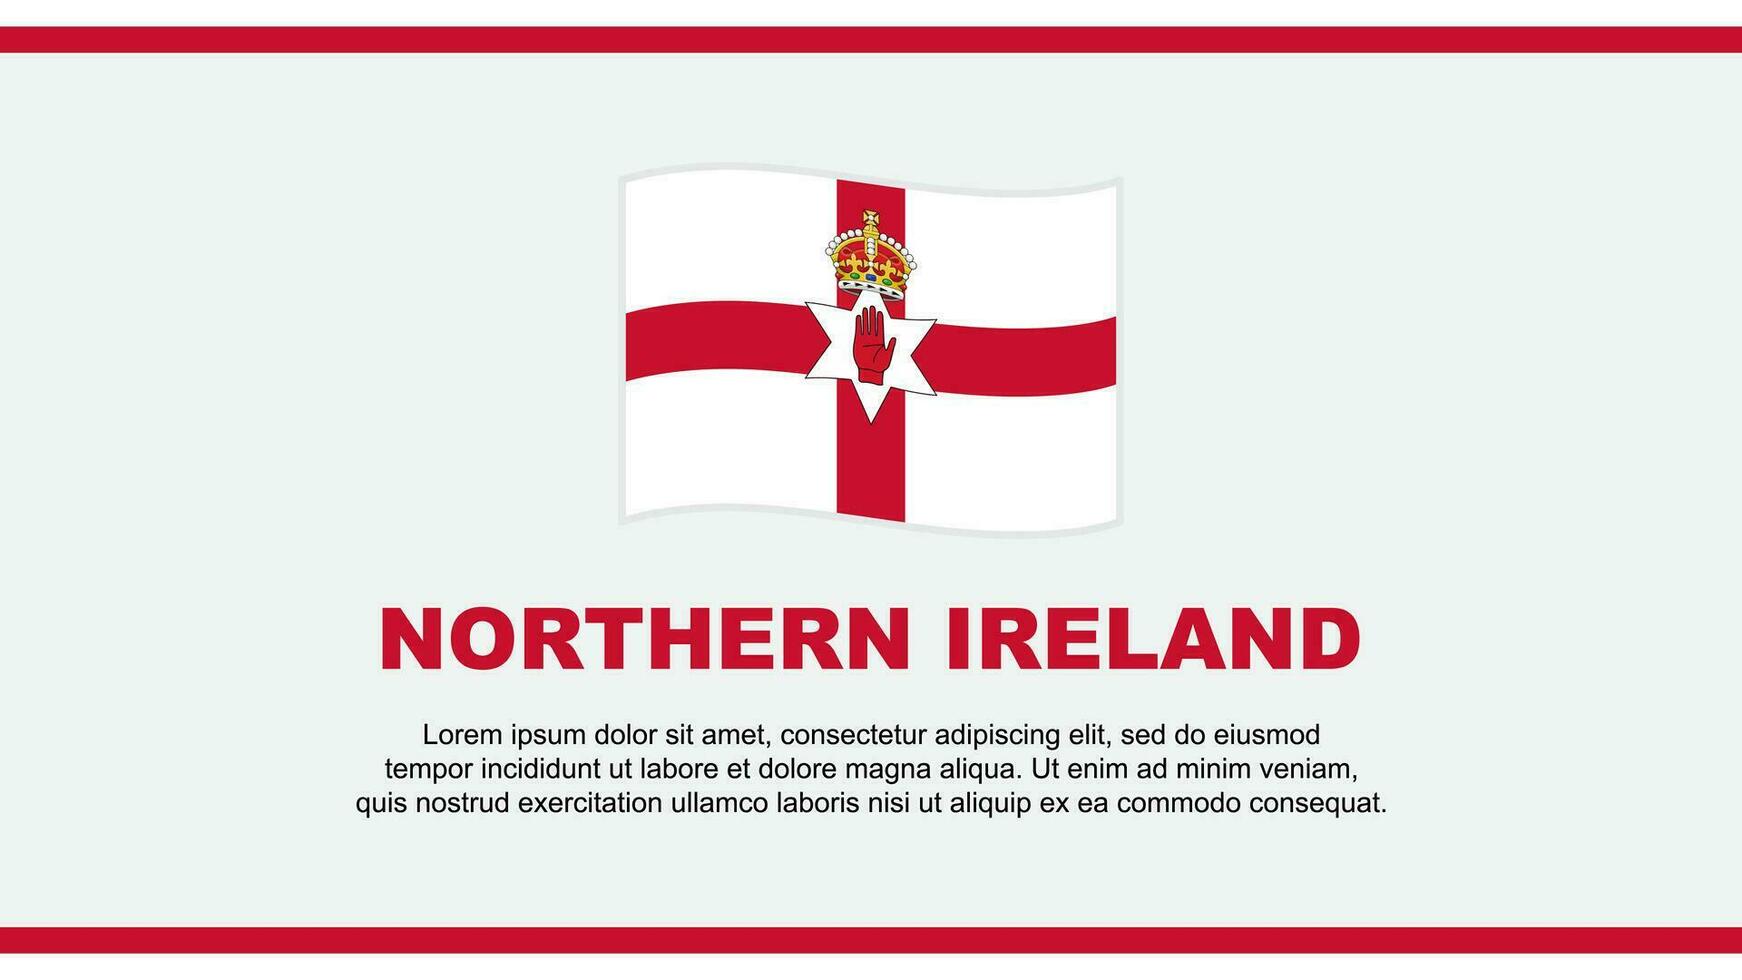 Northern Ireland Flag Abstract Background Design Template. Northern Ireland Independence Day Banner Social Media Vector Illustration. Northern Ireland Design